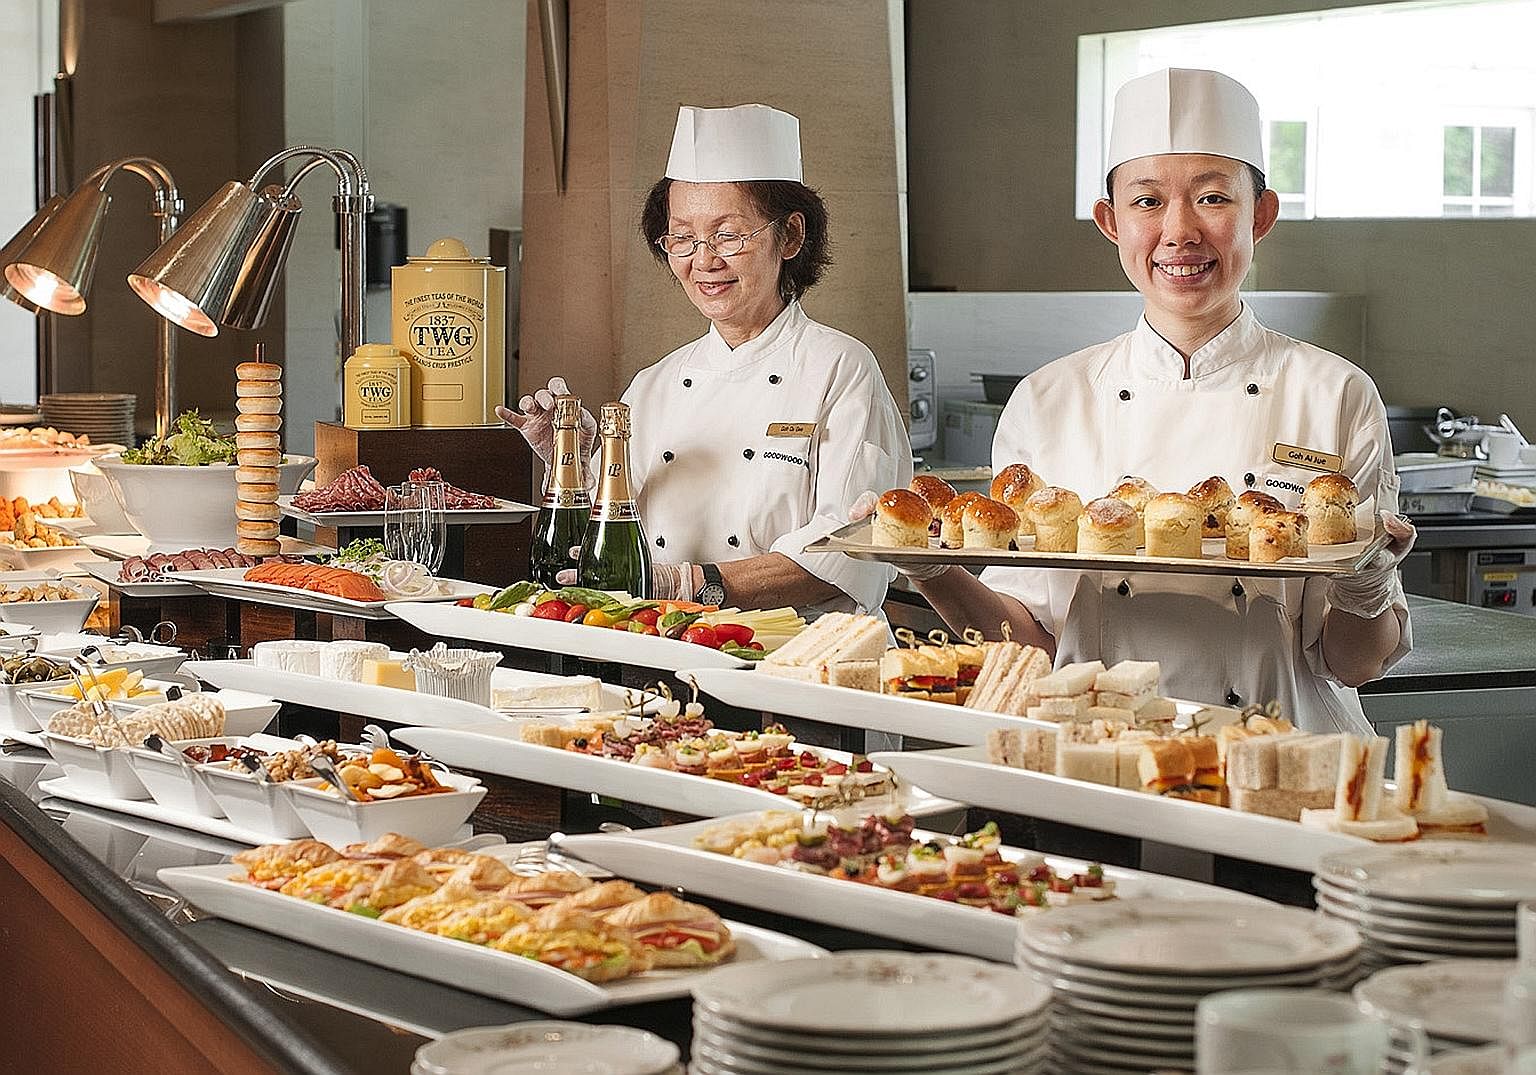 At Goodwood Park Hotel buffets, staff are stationed at the counters to serve dishes, to reduce diners' contact with food. 